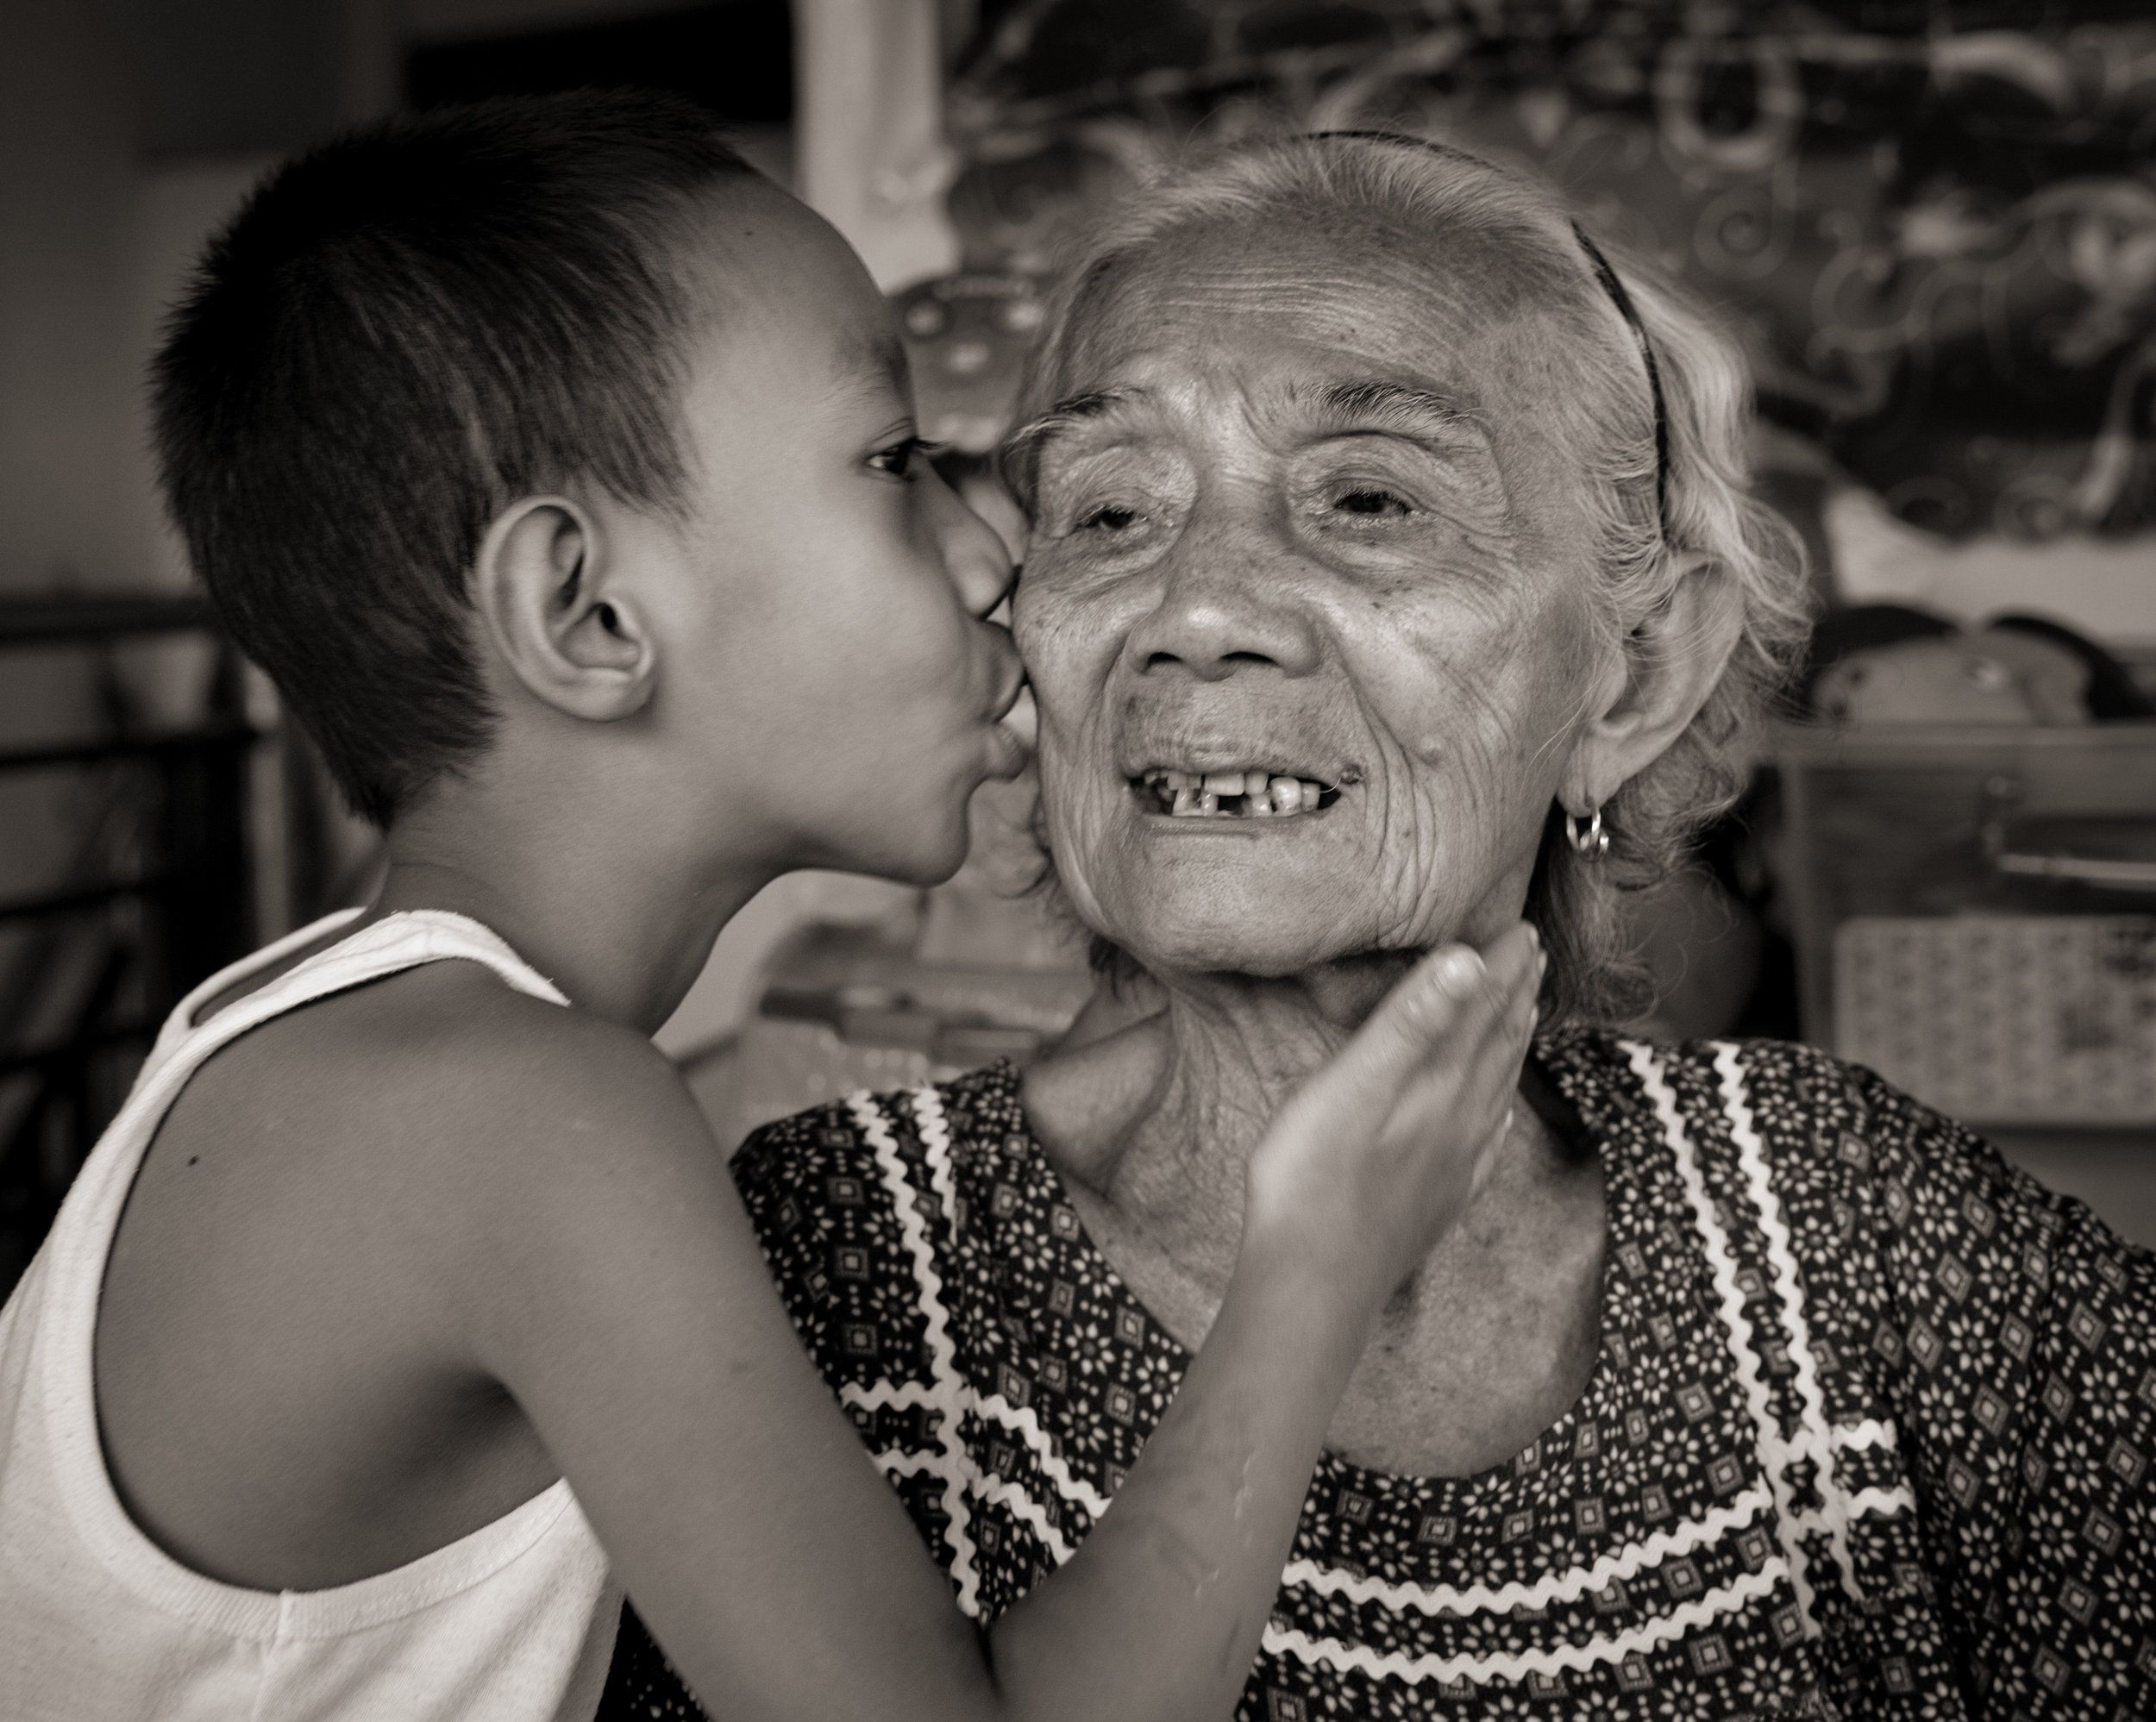 Narcisa Claveria receives a gentle kiss from her great-grandson, Joseph Tena, 8, whom she and her husband have raised since his father died when he was an infant. Claveria was 12 when Japanese soldiers took her as a sex slave for 1 1/2 years. They raped her mother and skinned her father alive before burning down their house. She could hear him scream, "Children, where are you? I'm in such pain." Image by Cheryl Diaz Meyer. Philippines, 2019.